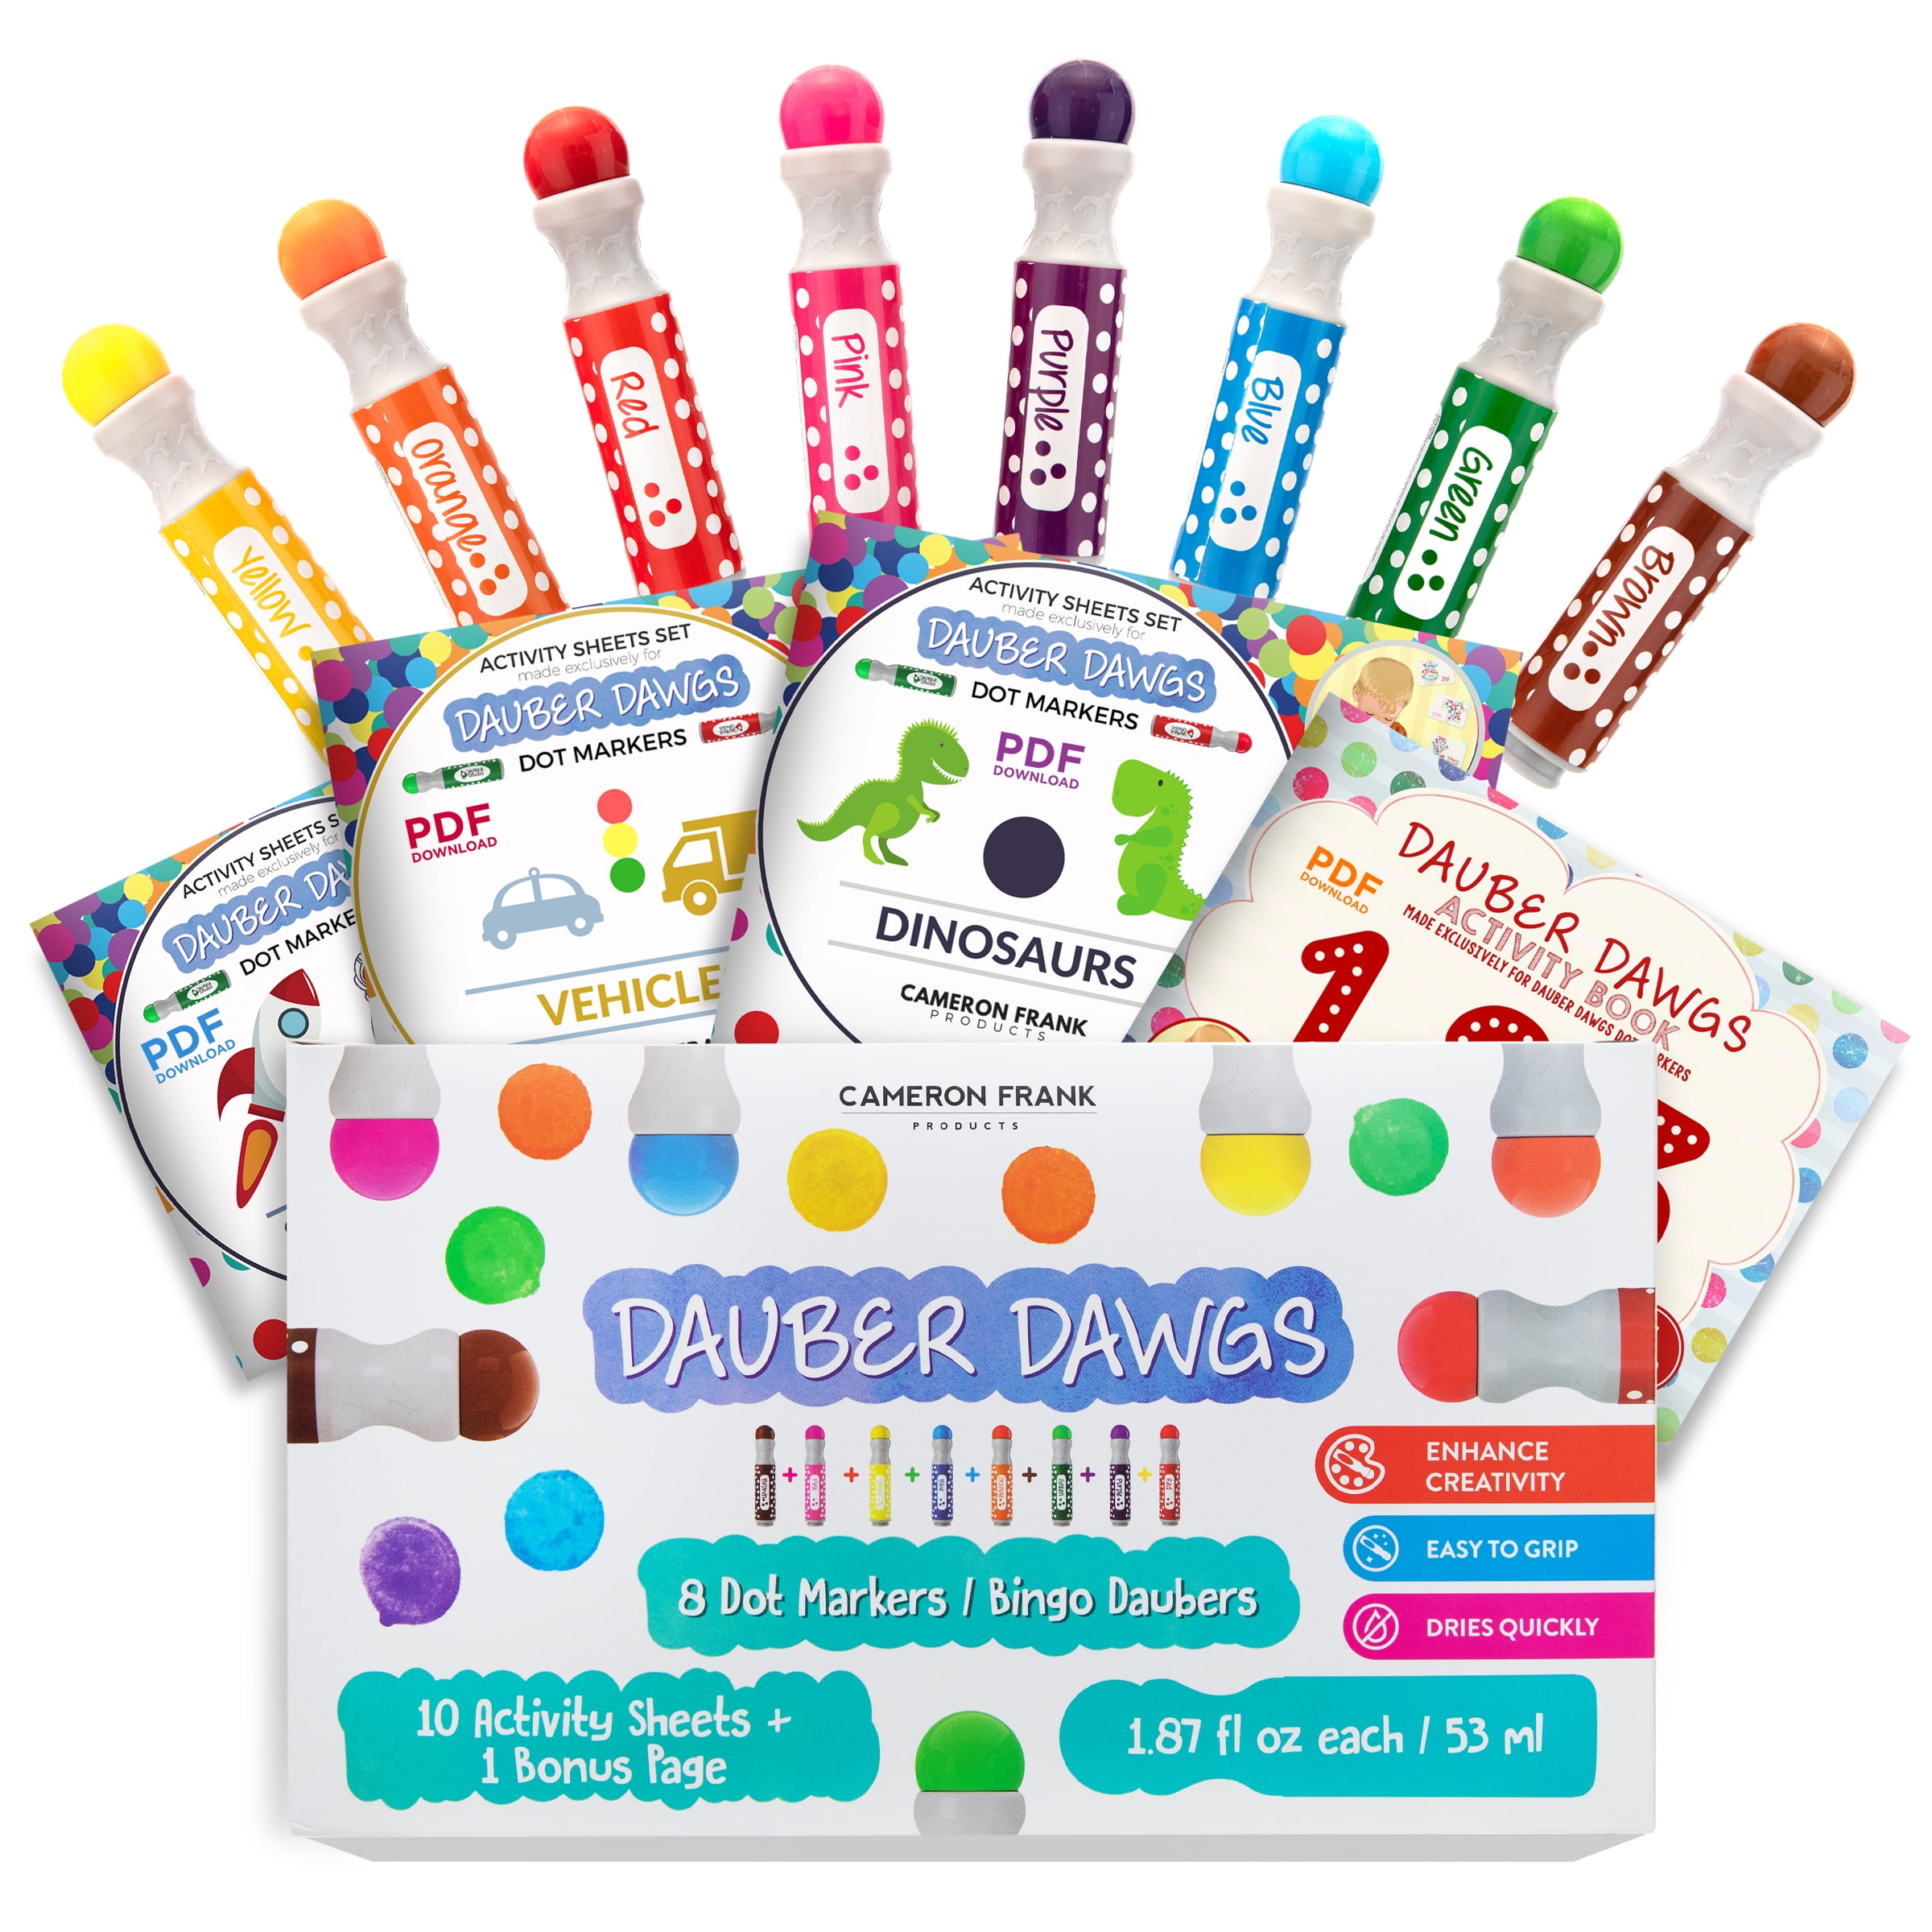 Nicecho Washable Dot Markers for Kids Toddlers & Preschoolers, 10 Colors  Bingo Paint Daubers Marker Kit with Free Activity Book. Non-Toxic  Water-Based